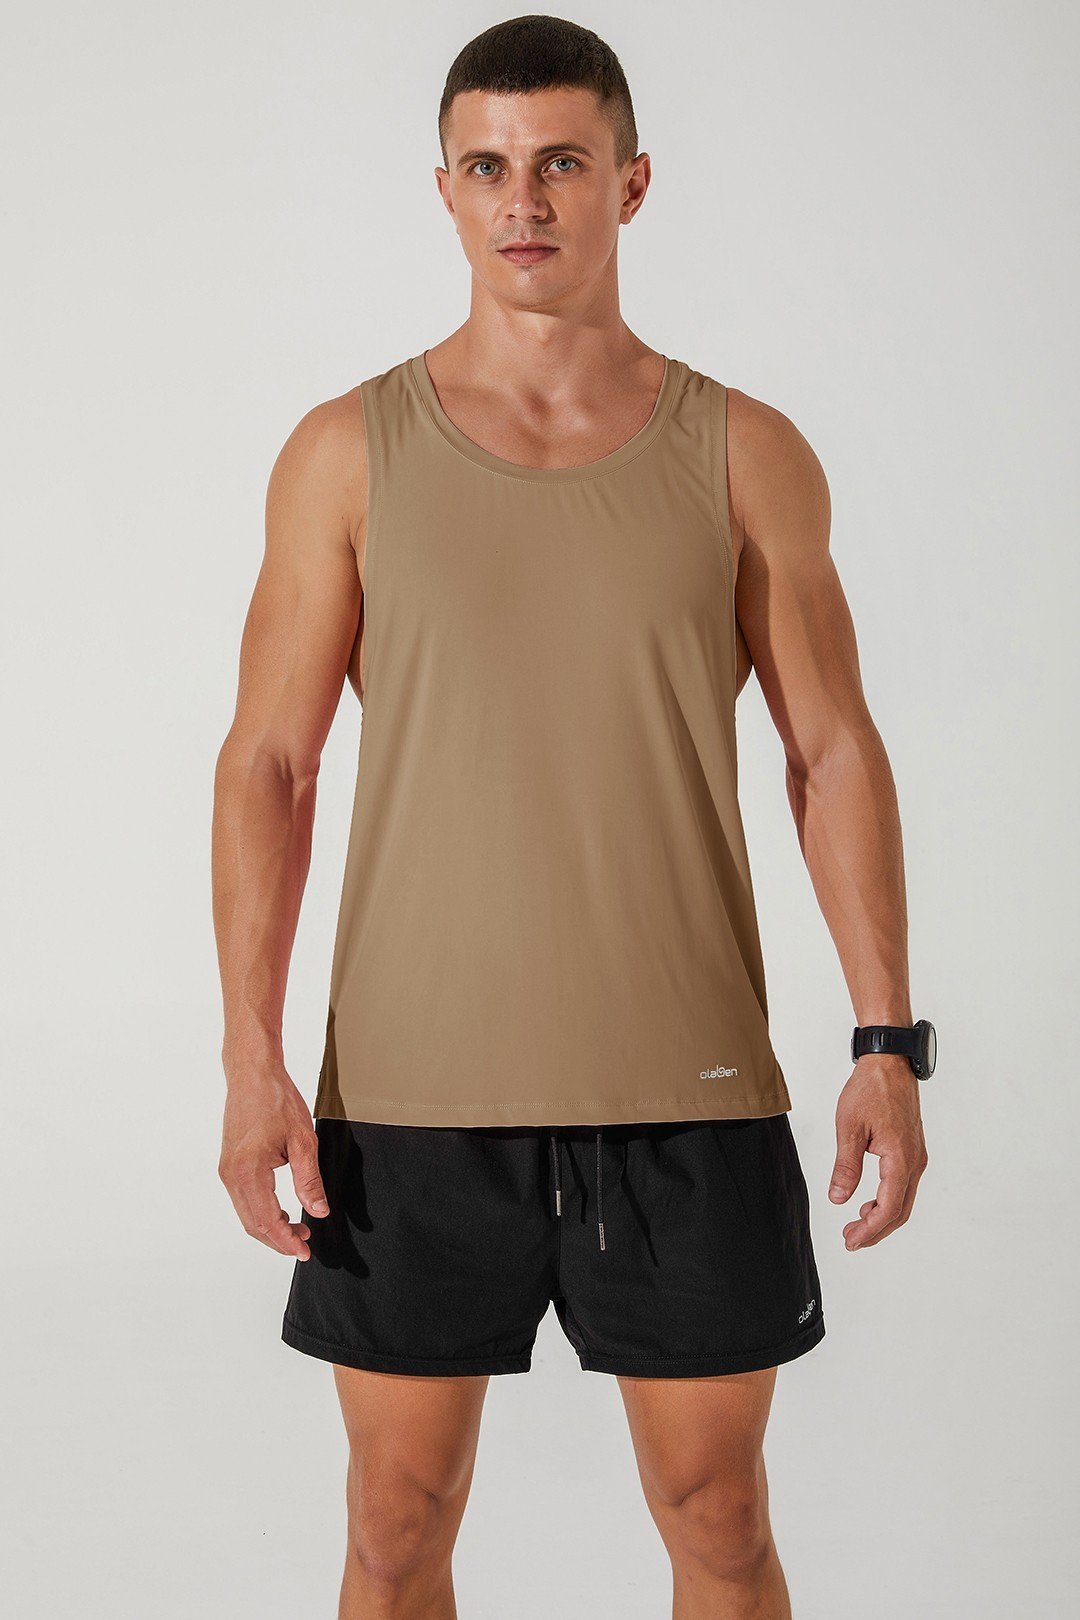 Men's cappuccino beige tank top by Ricard Tank - stylish and comfortable fashion choice.